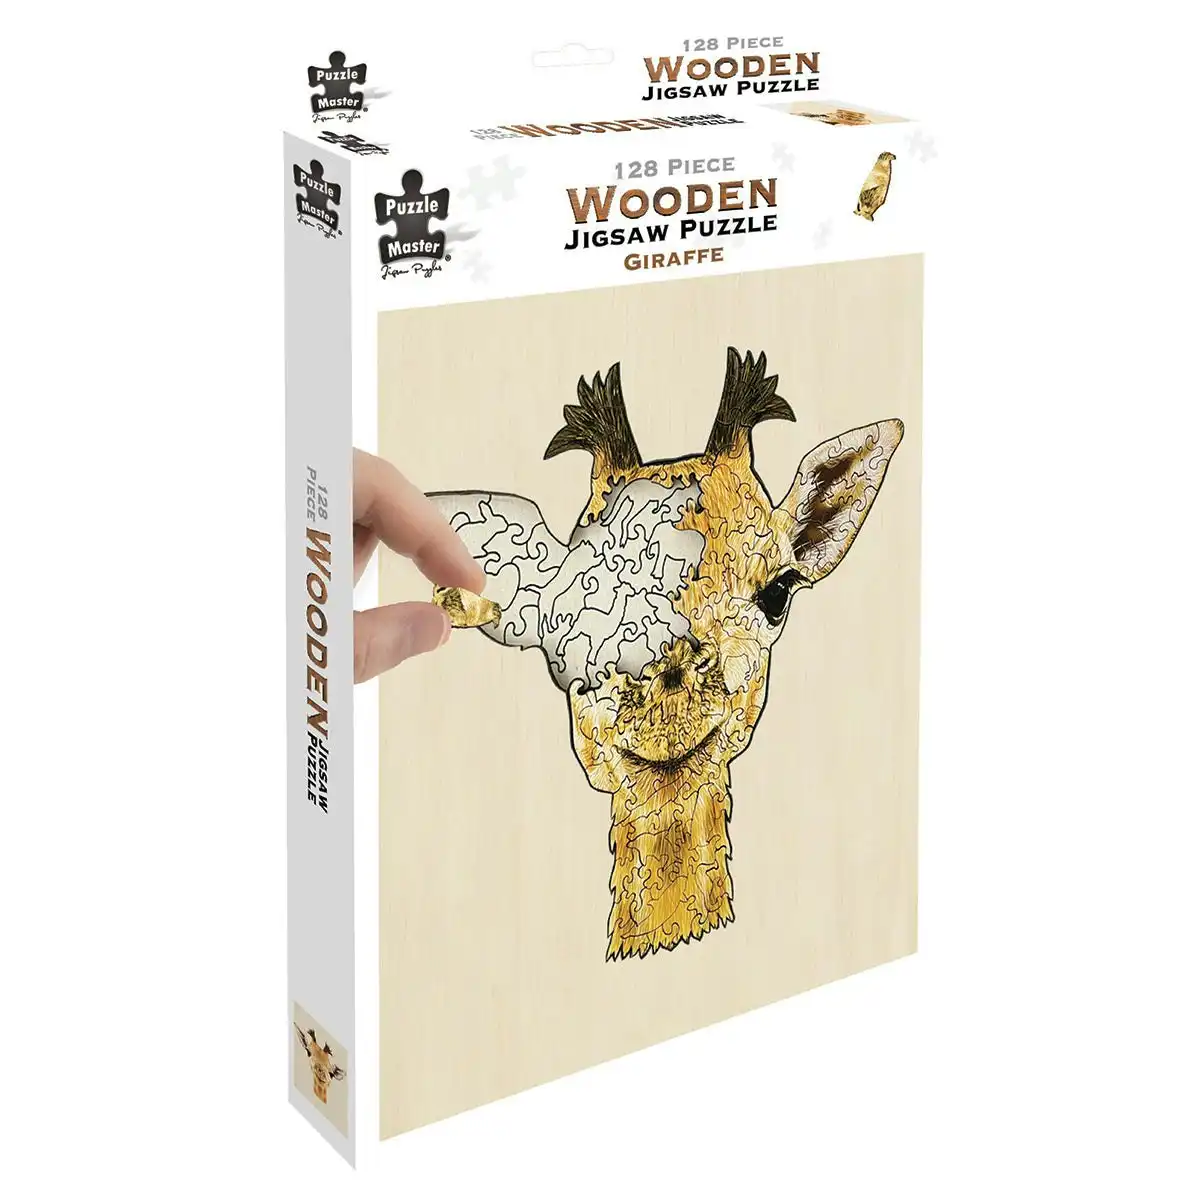 Puzzle Master Wooden Jigsaw Puzzle, Giraffe- 128pc